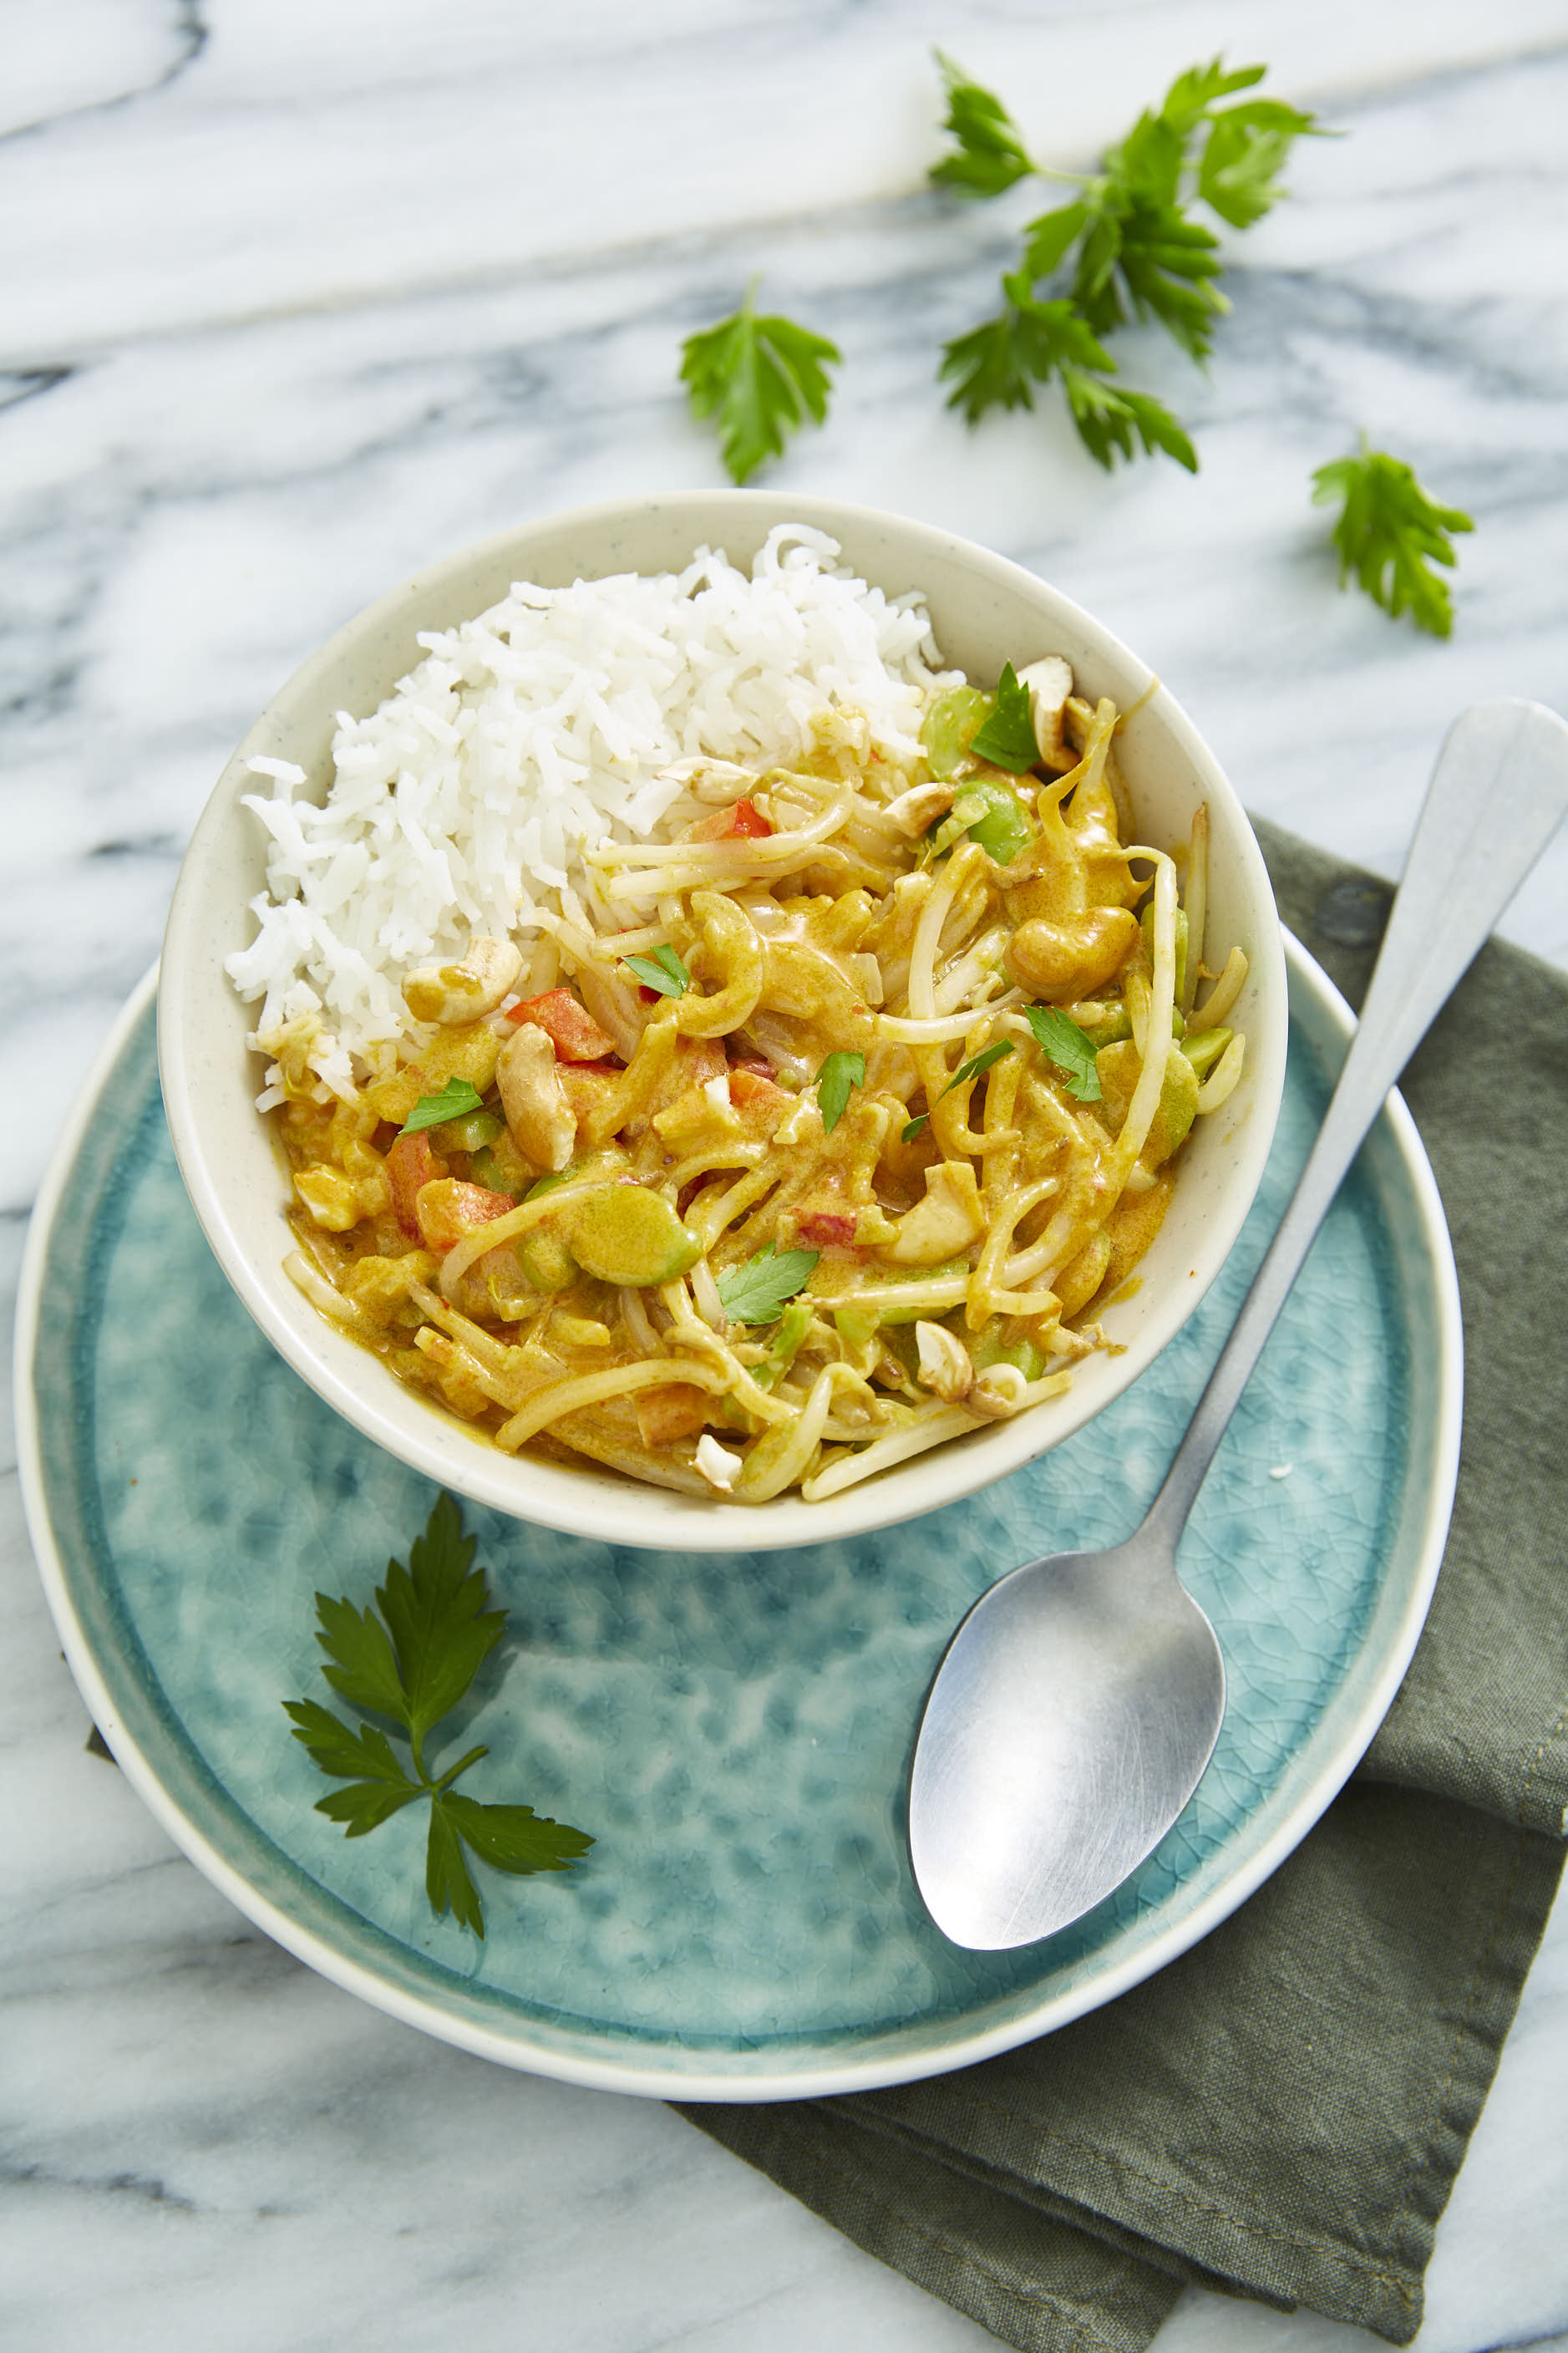 https://www.wostin.fr/assets/images/recettes/curry.jpg